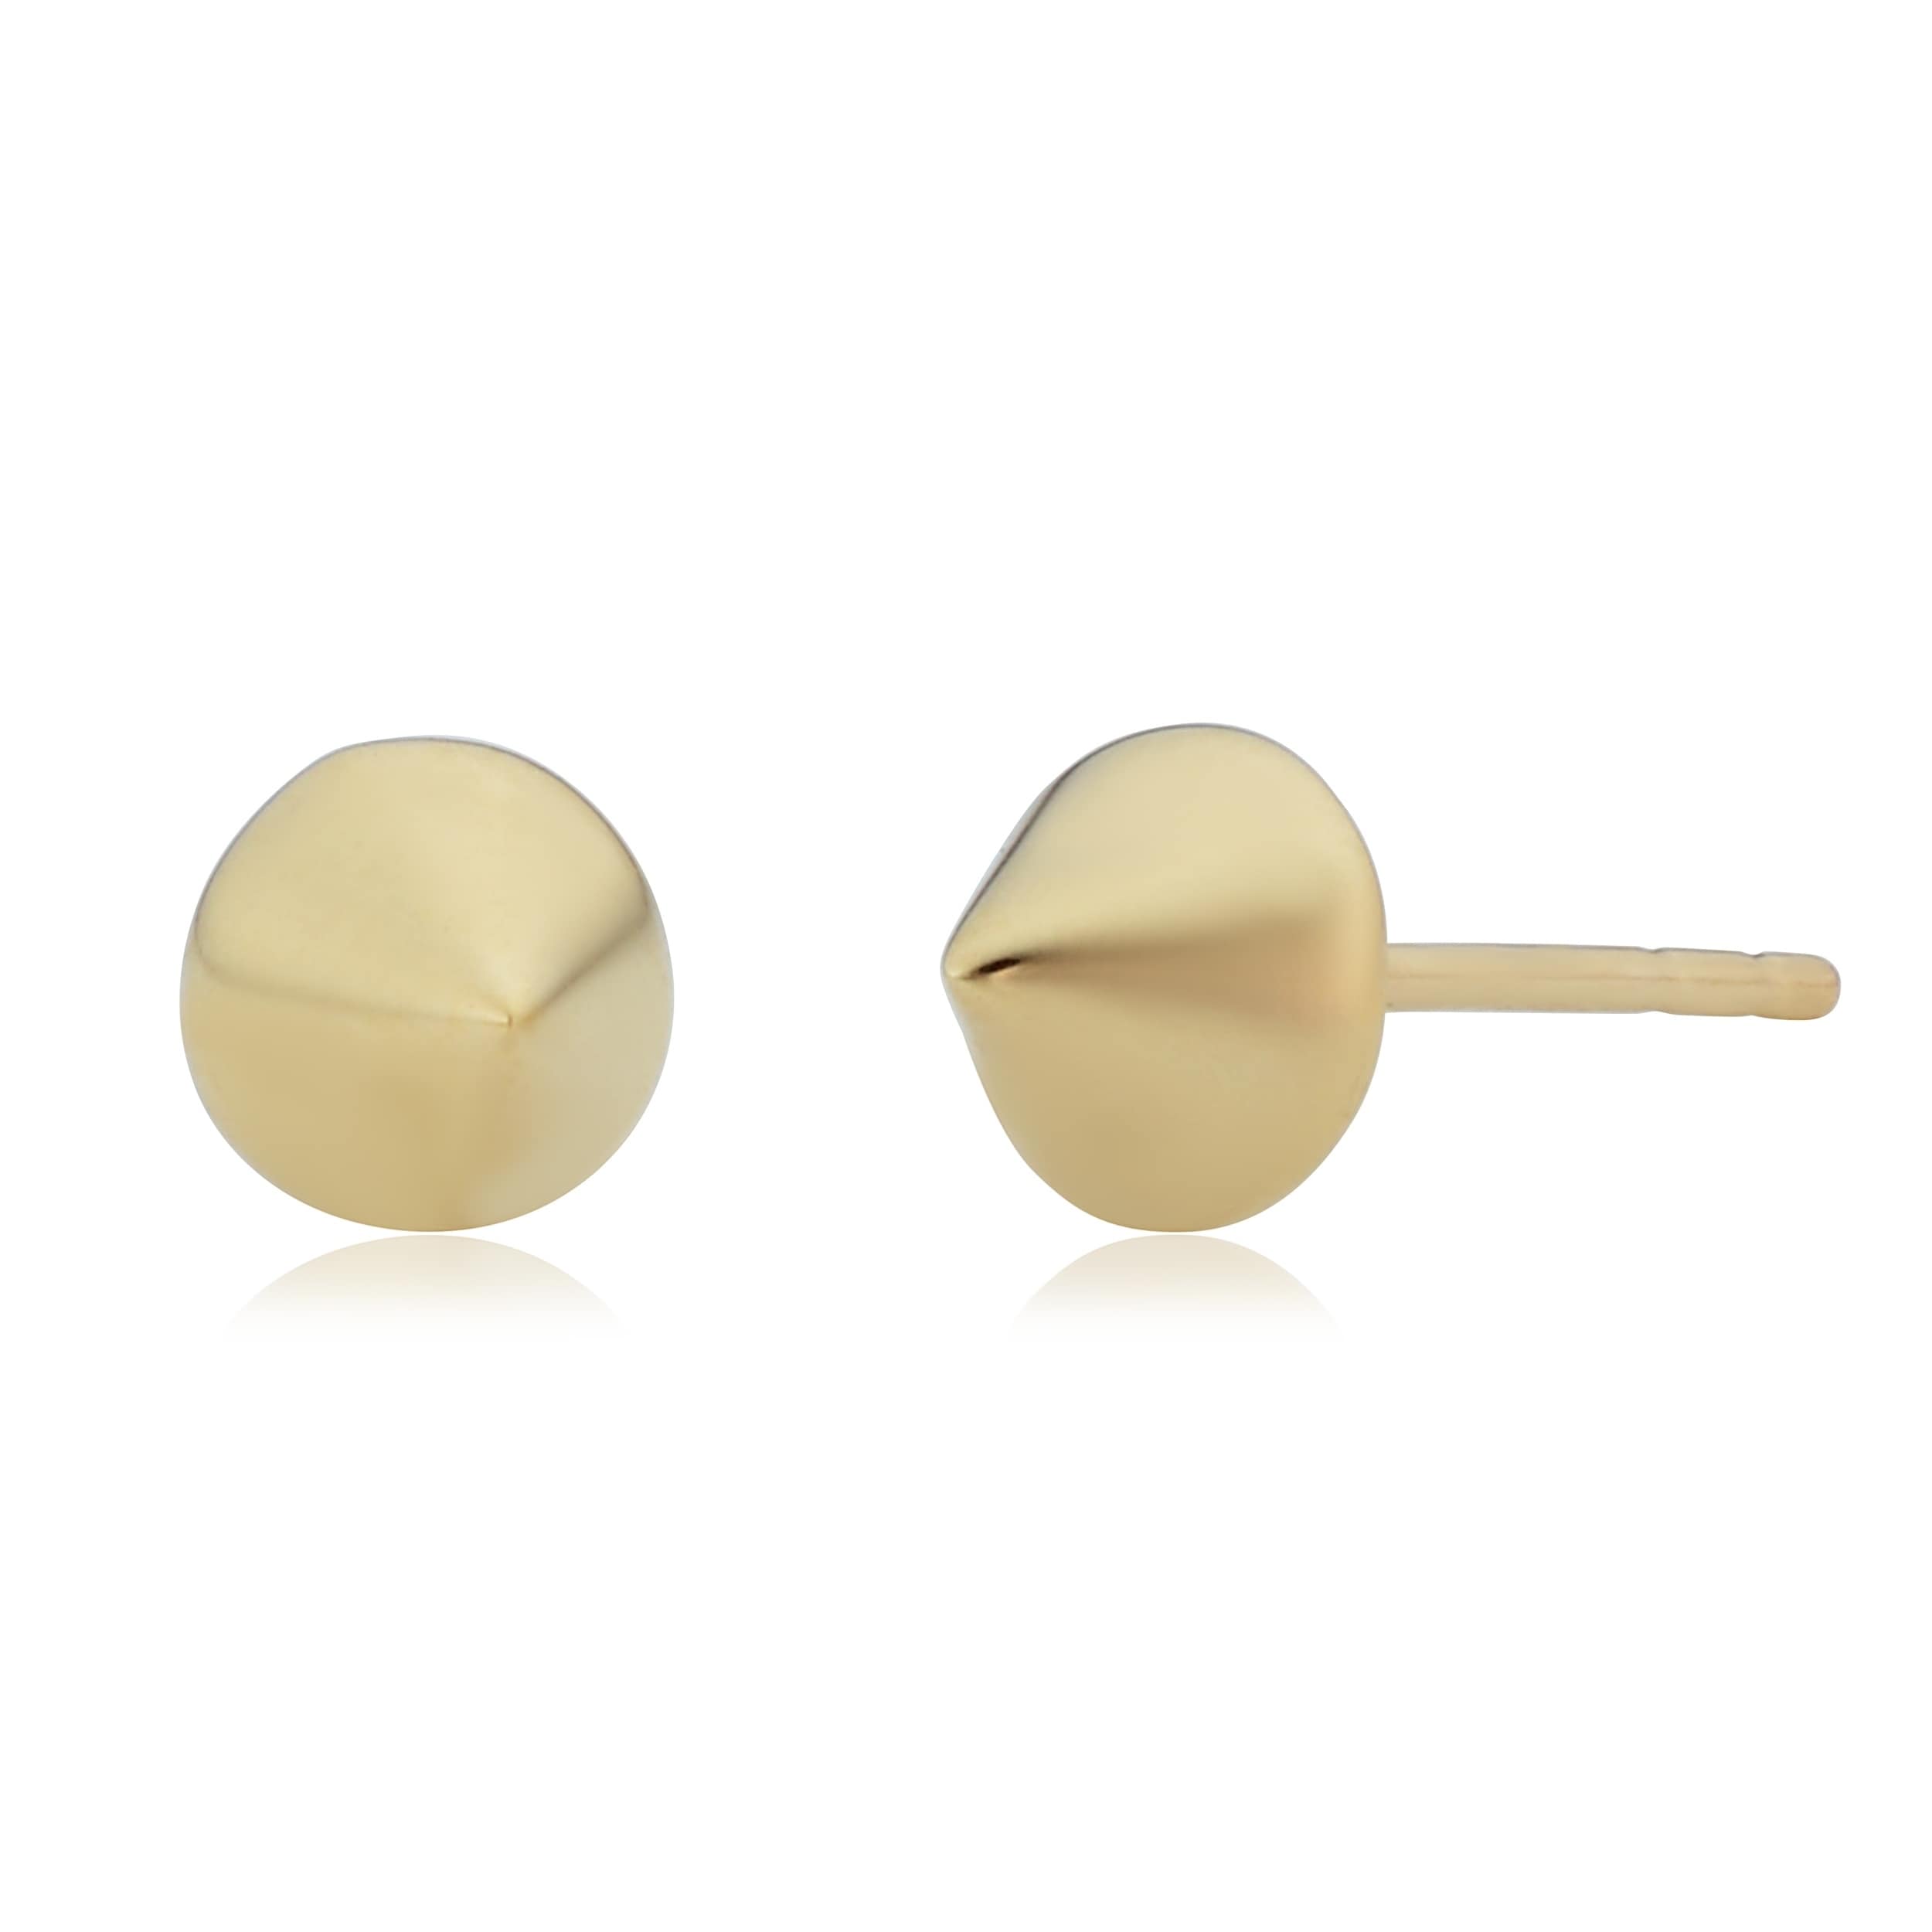 6mm Elegant 14K Yellow Gold Hollow Ball Studs Screw Back Safety Back Earrings Sizes 2mm 